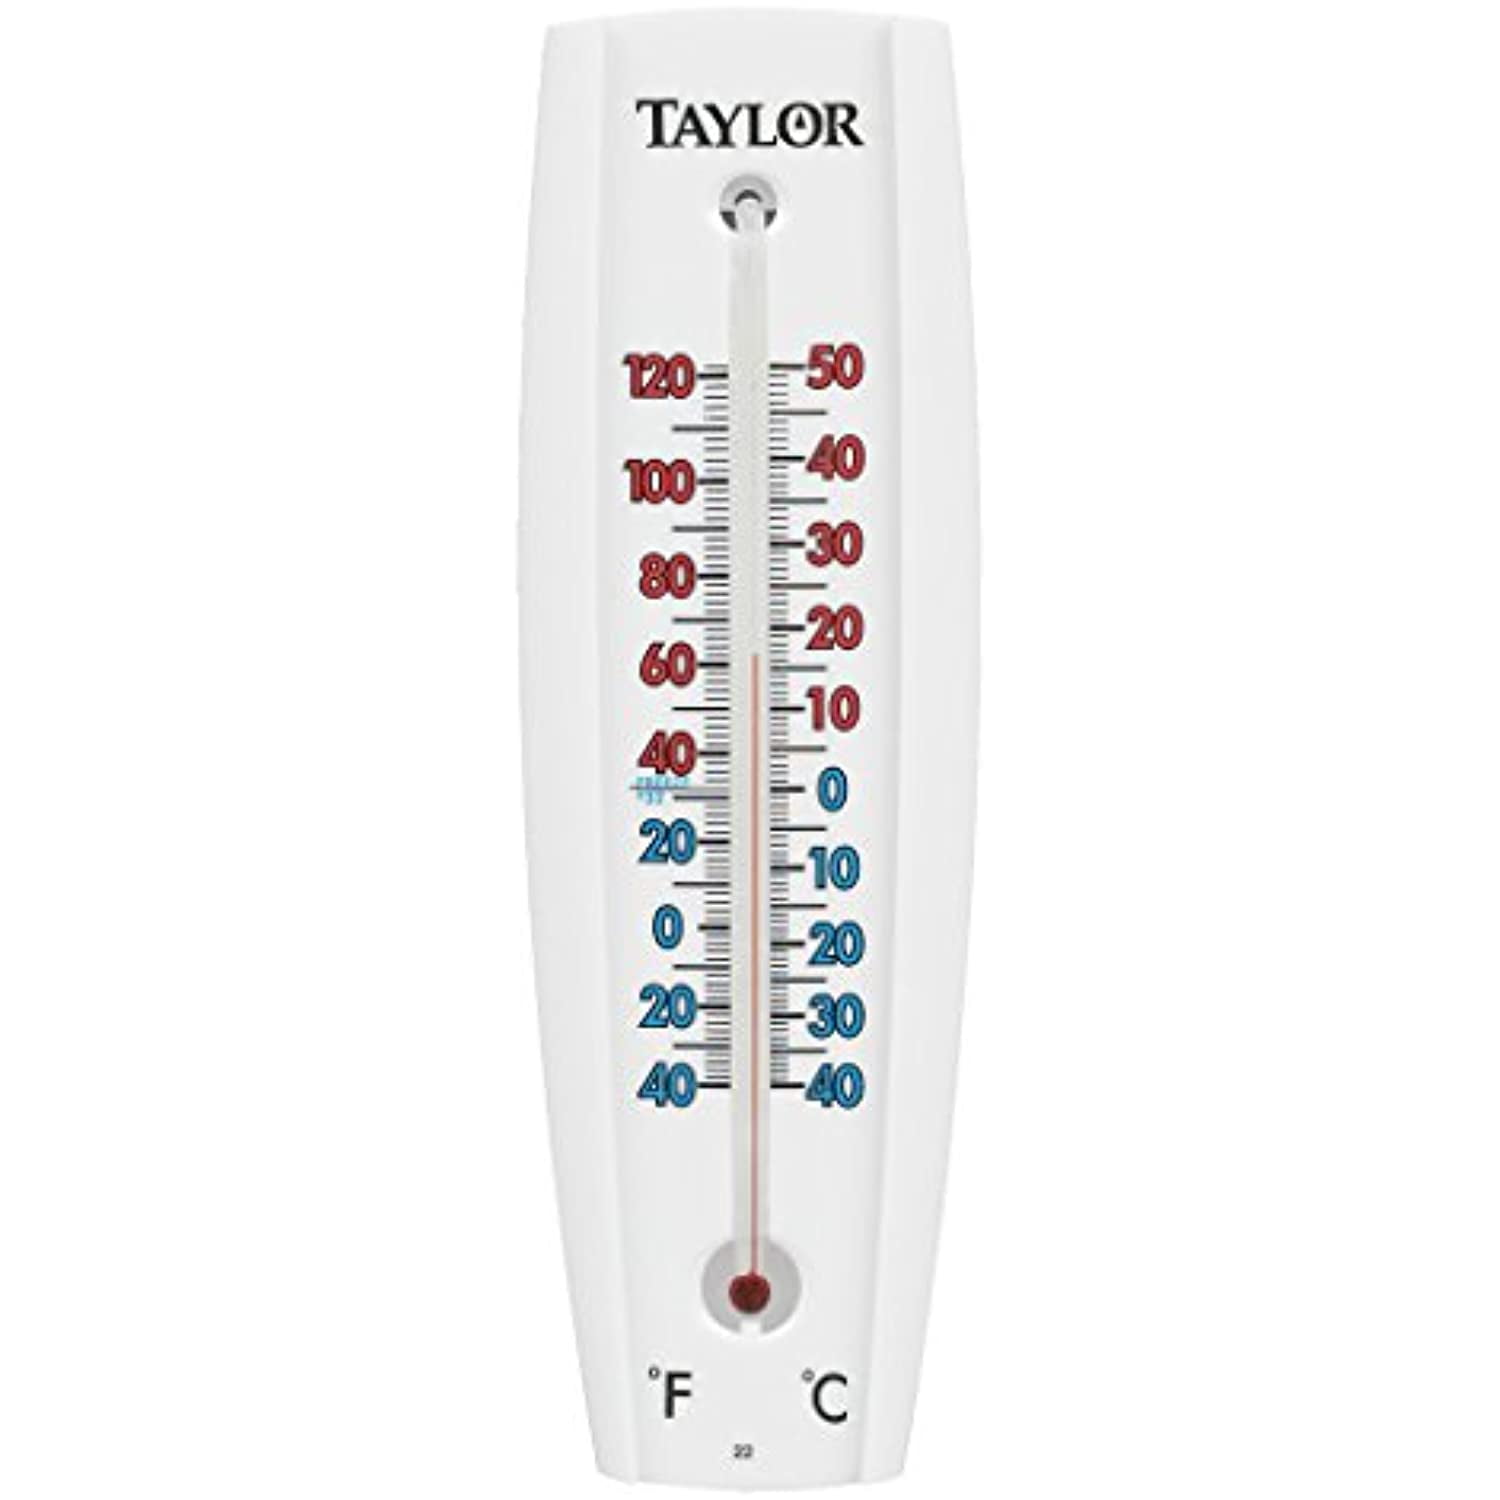 Taylor 5380 N 1 3/4" Mini Window Stick On Indoor/Outdoor Thermometer Free Ship